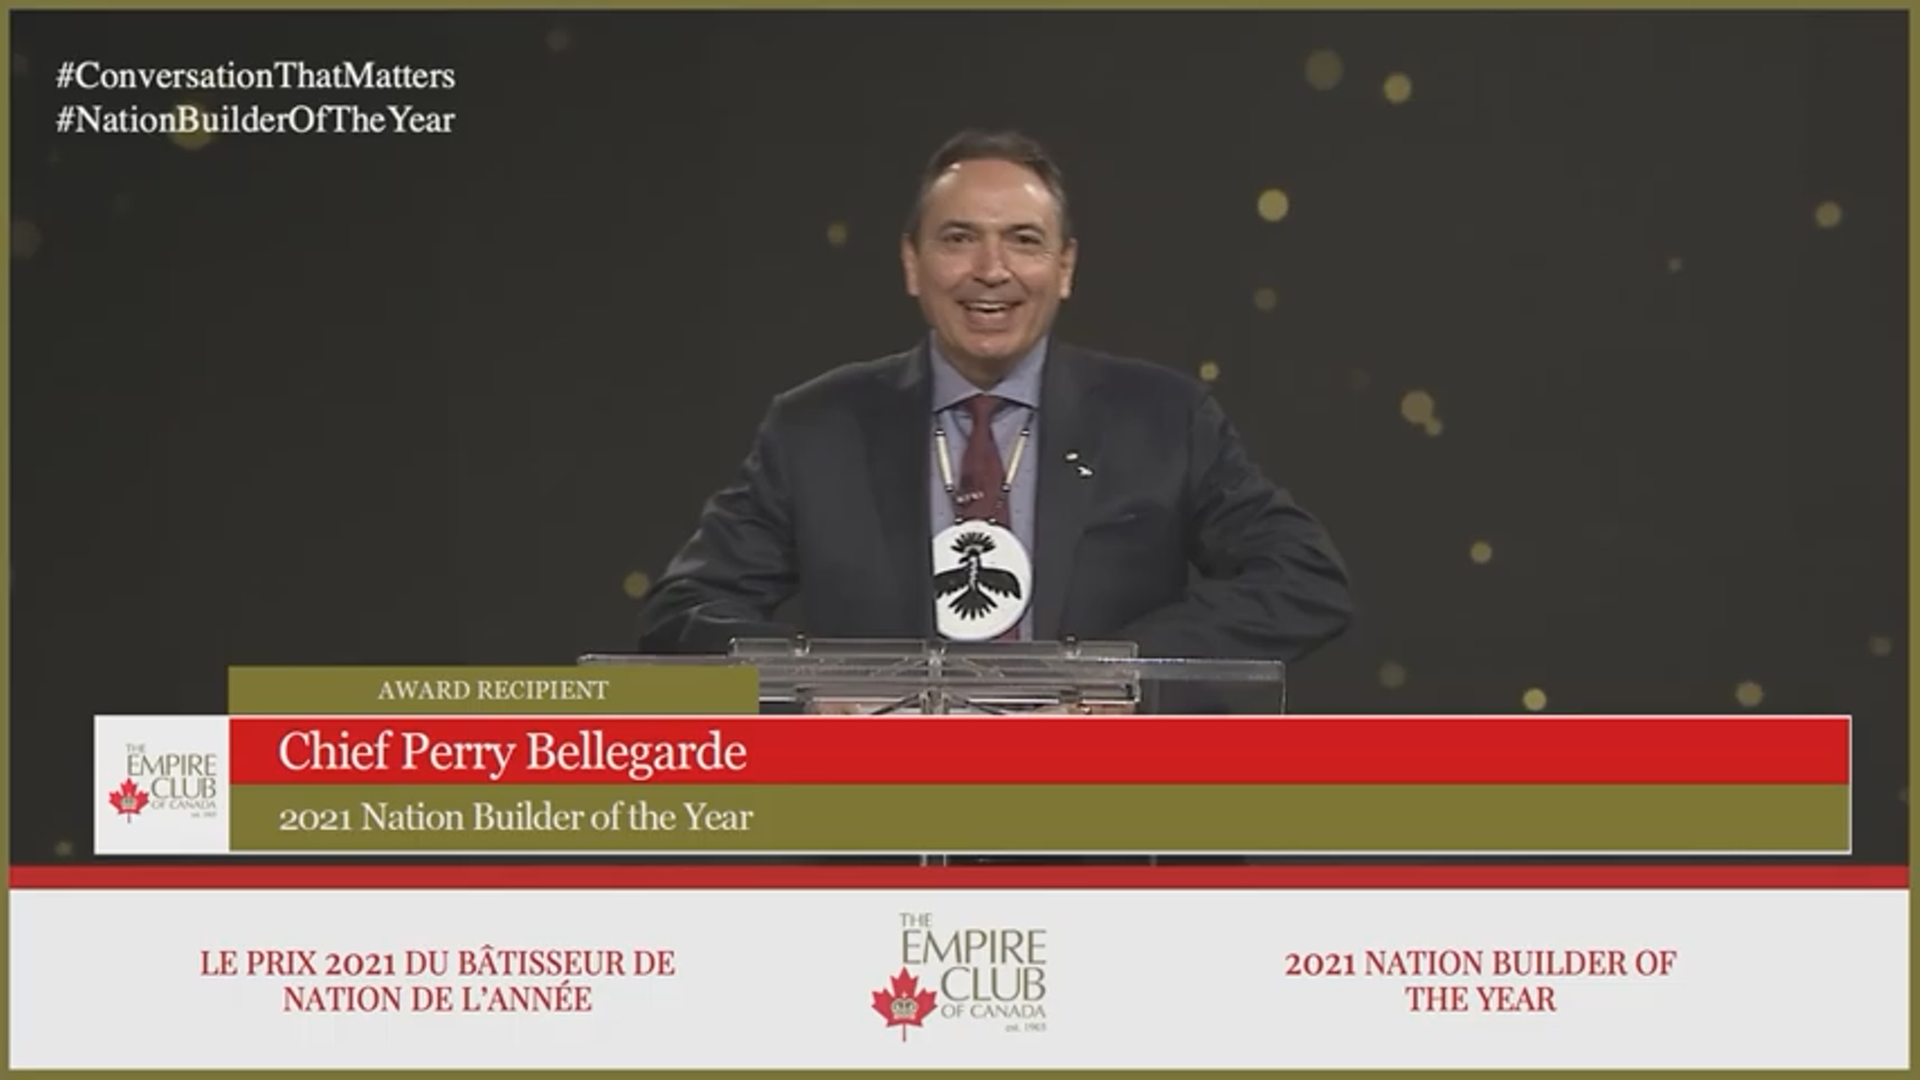 A man, Perry Bellegarde, smiling in front of a podium